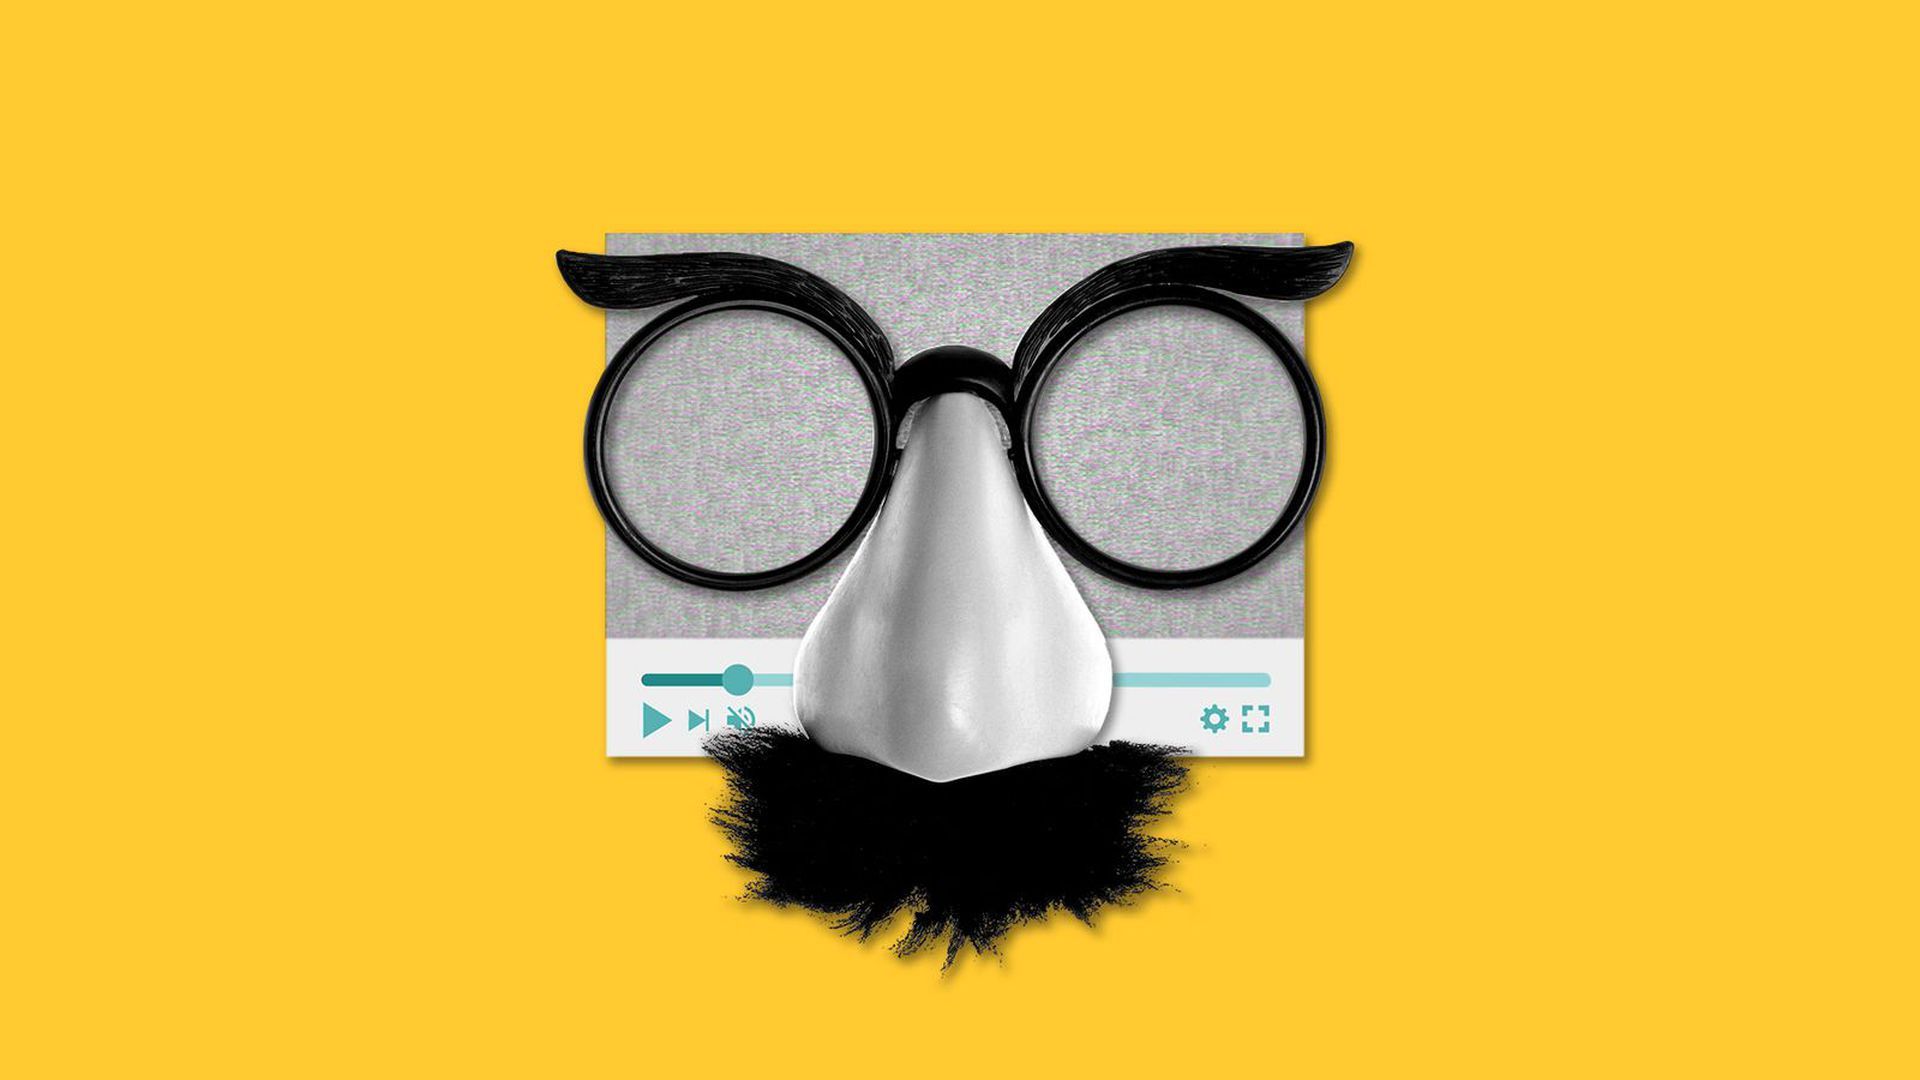 Illustration of a video player displaying static, wearing a Groucho Marx mask 